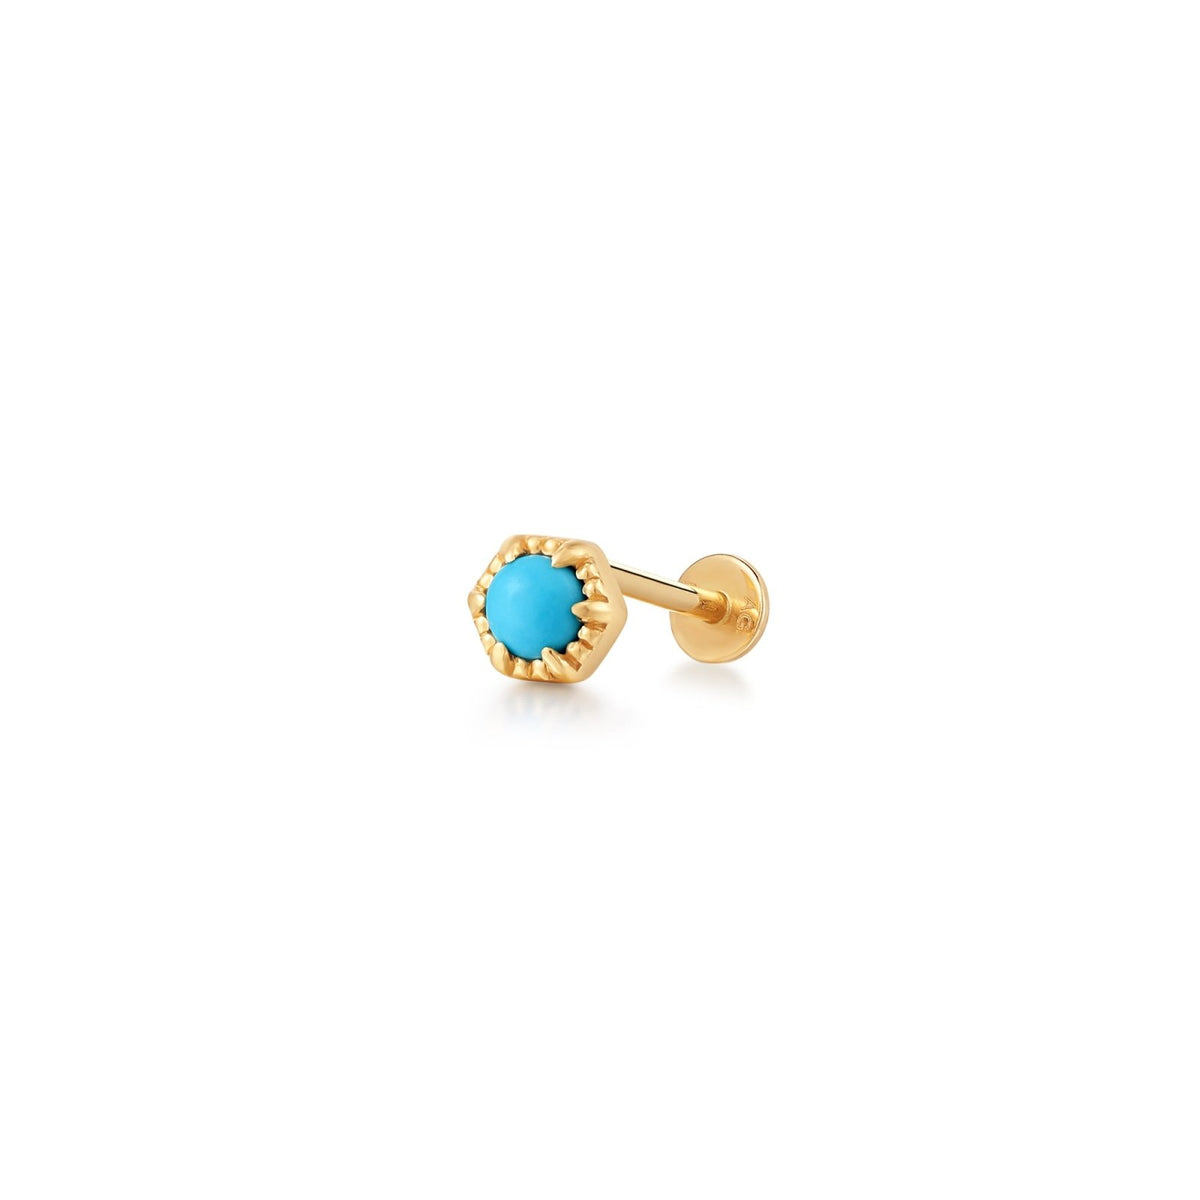 Turquoise Solitaire Single Piercing Earring - Peterson MADE